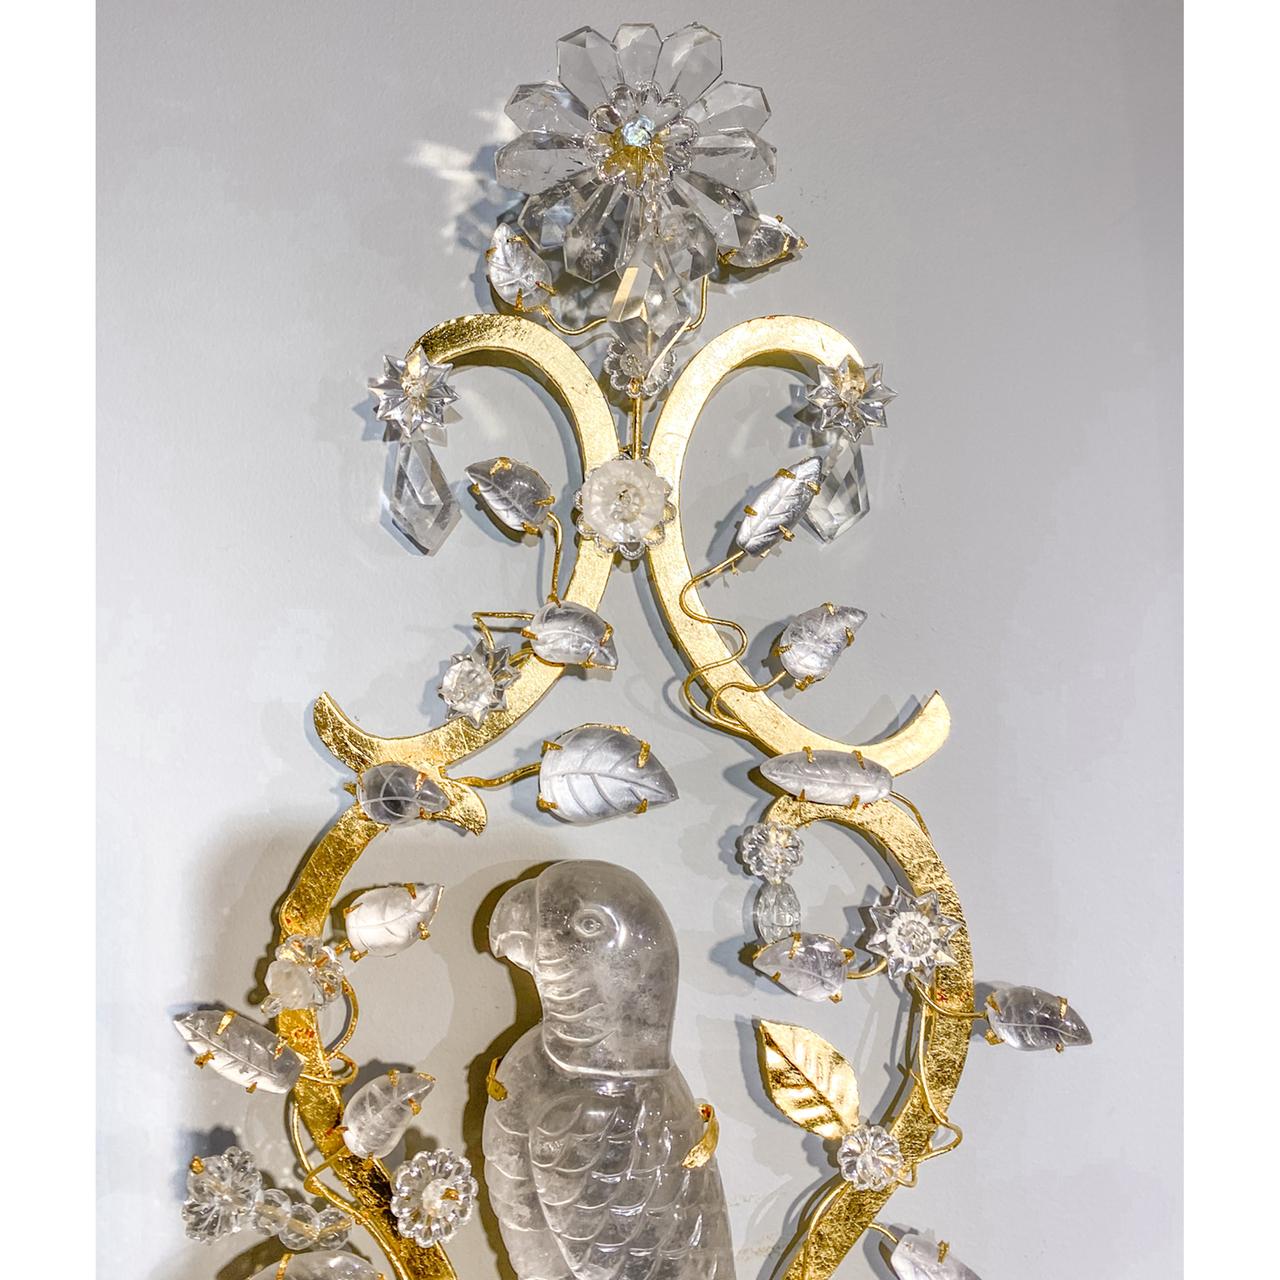 Rock Crystal and Gilt Bronze Sconces with Floral Accents & Carved Perched Parrot For Sale 1